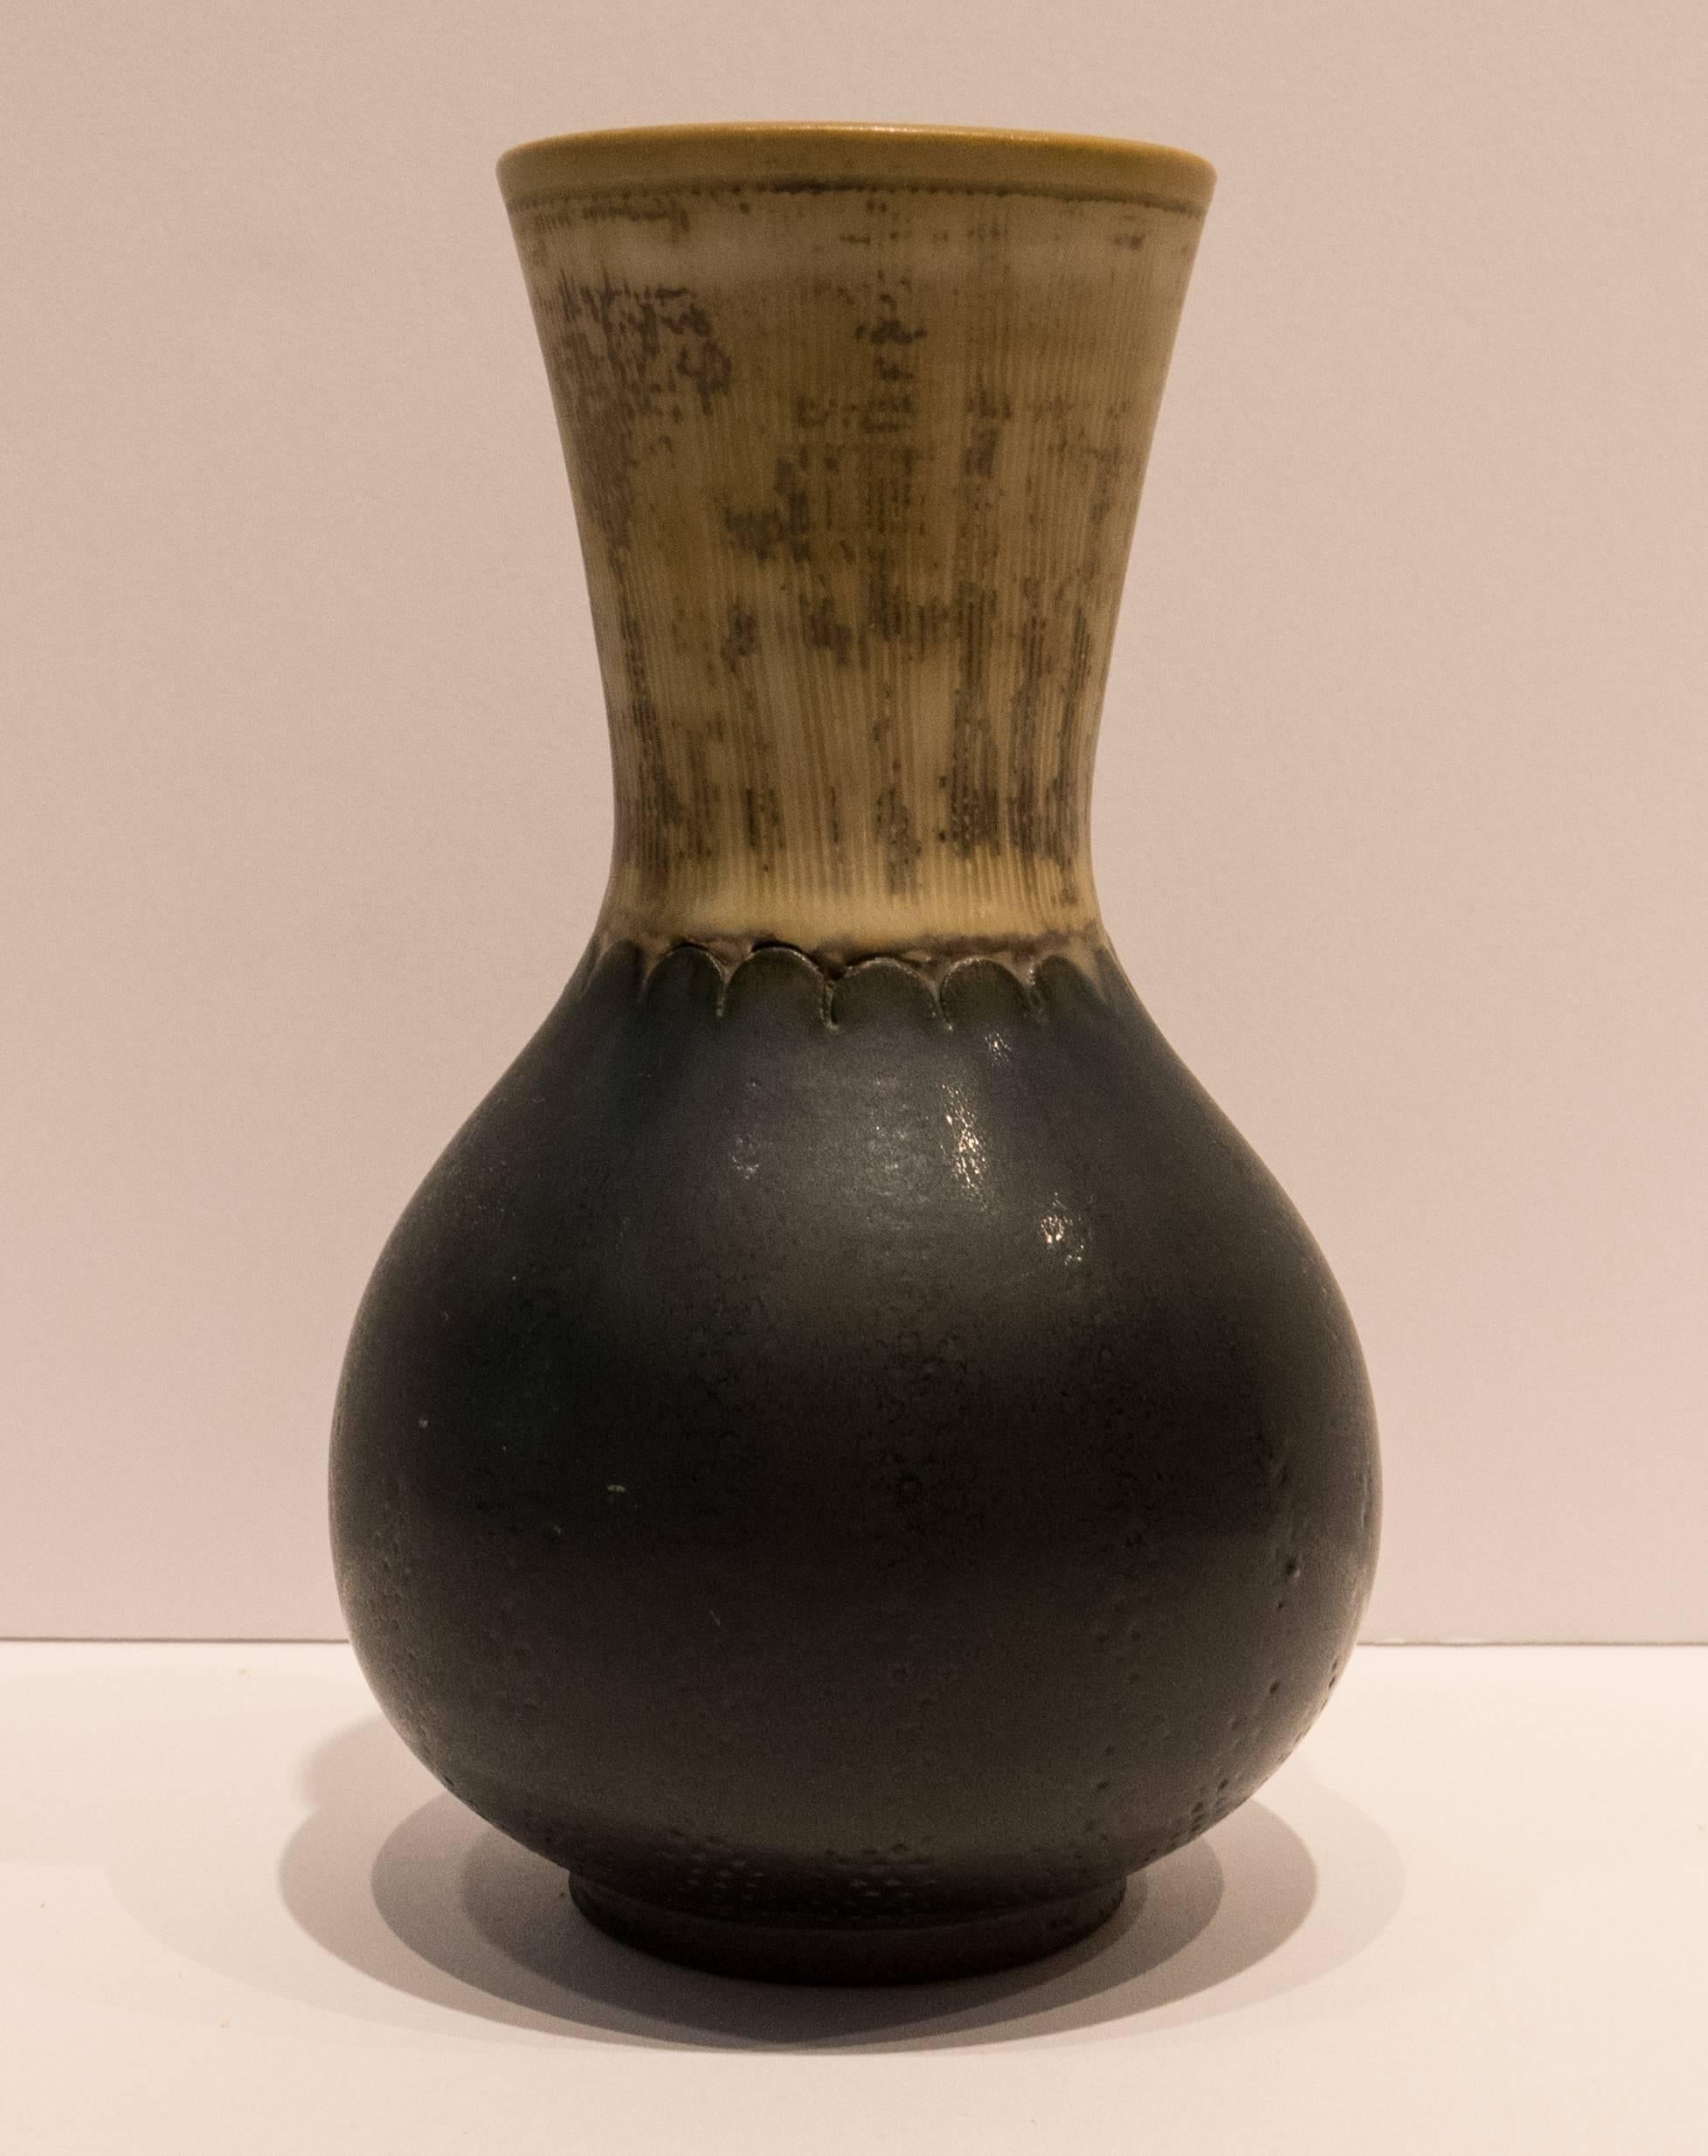 Beautifully formed and glazed stoneware vase with defined foot and tapering neck. From Wilhelm Kage's Farsta series, produced at Gustavsberg, circa 1952. Kage (1889-1960), who trained as an artist and poster designer, was the artistic director at